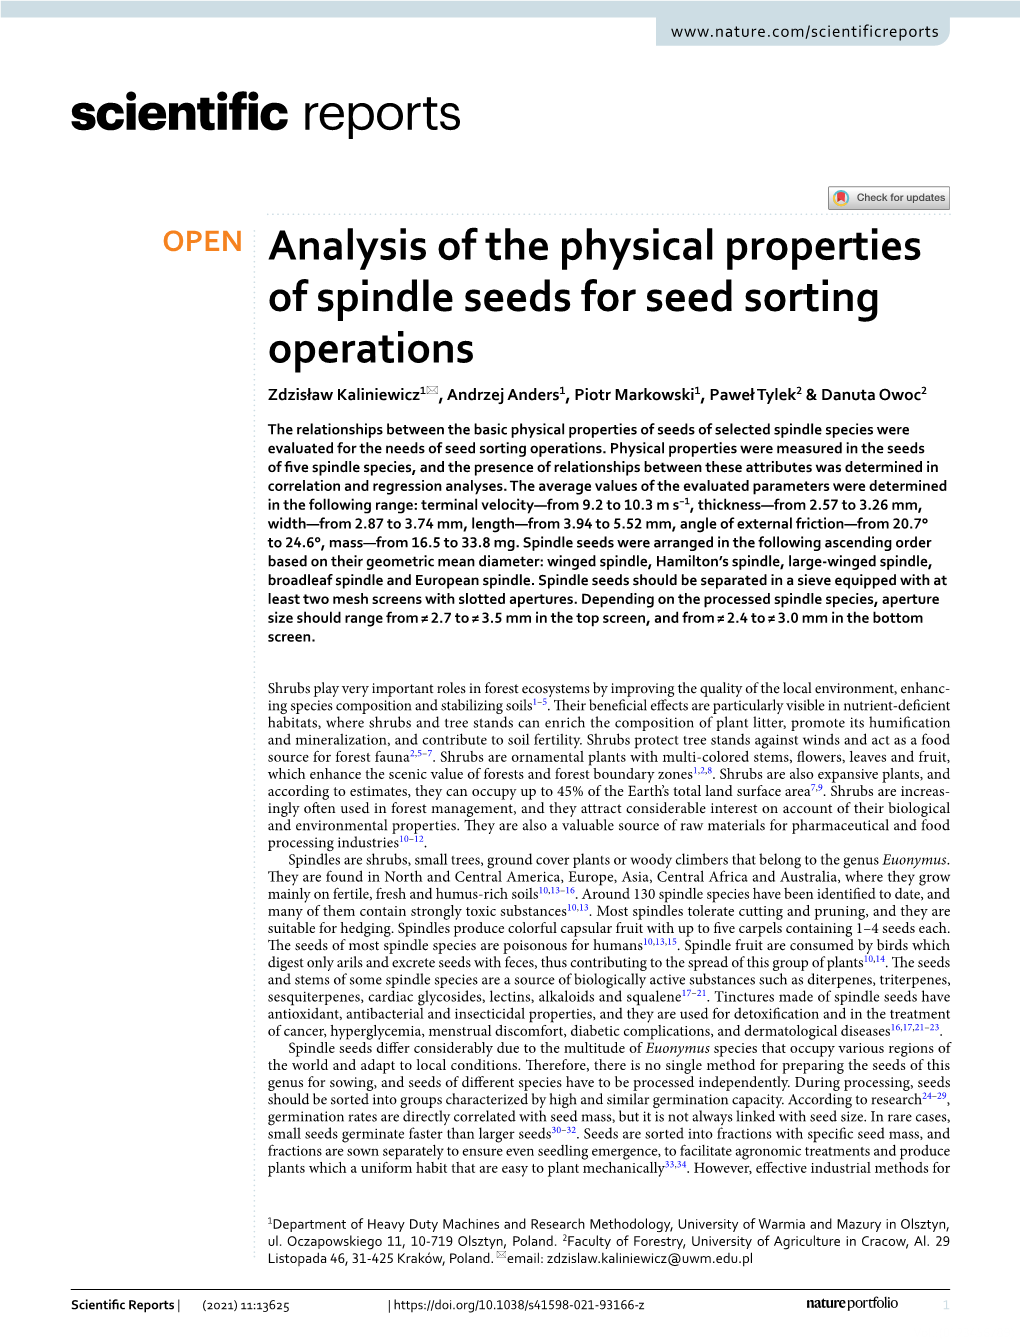 Analysis of the Physical Properties of Spindle Seeds for Seed Sorting Operations